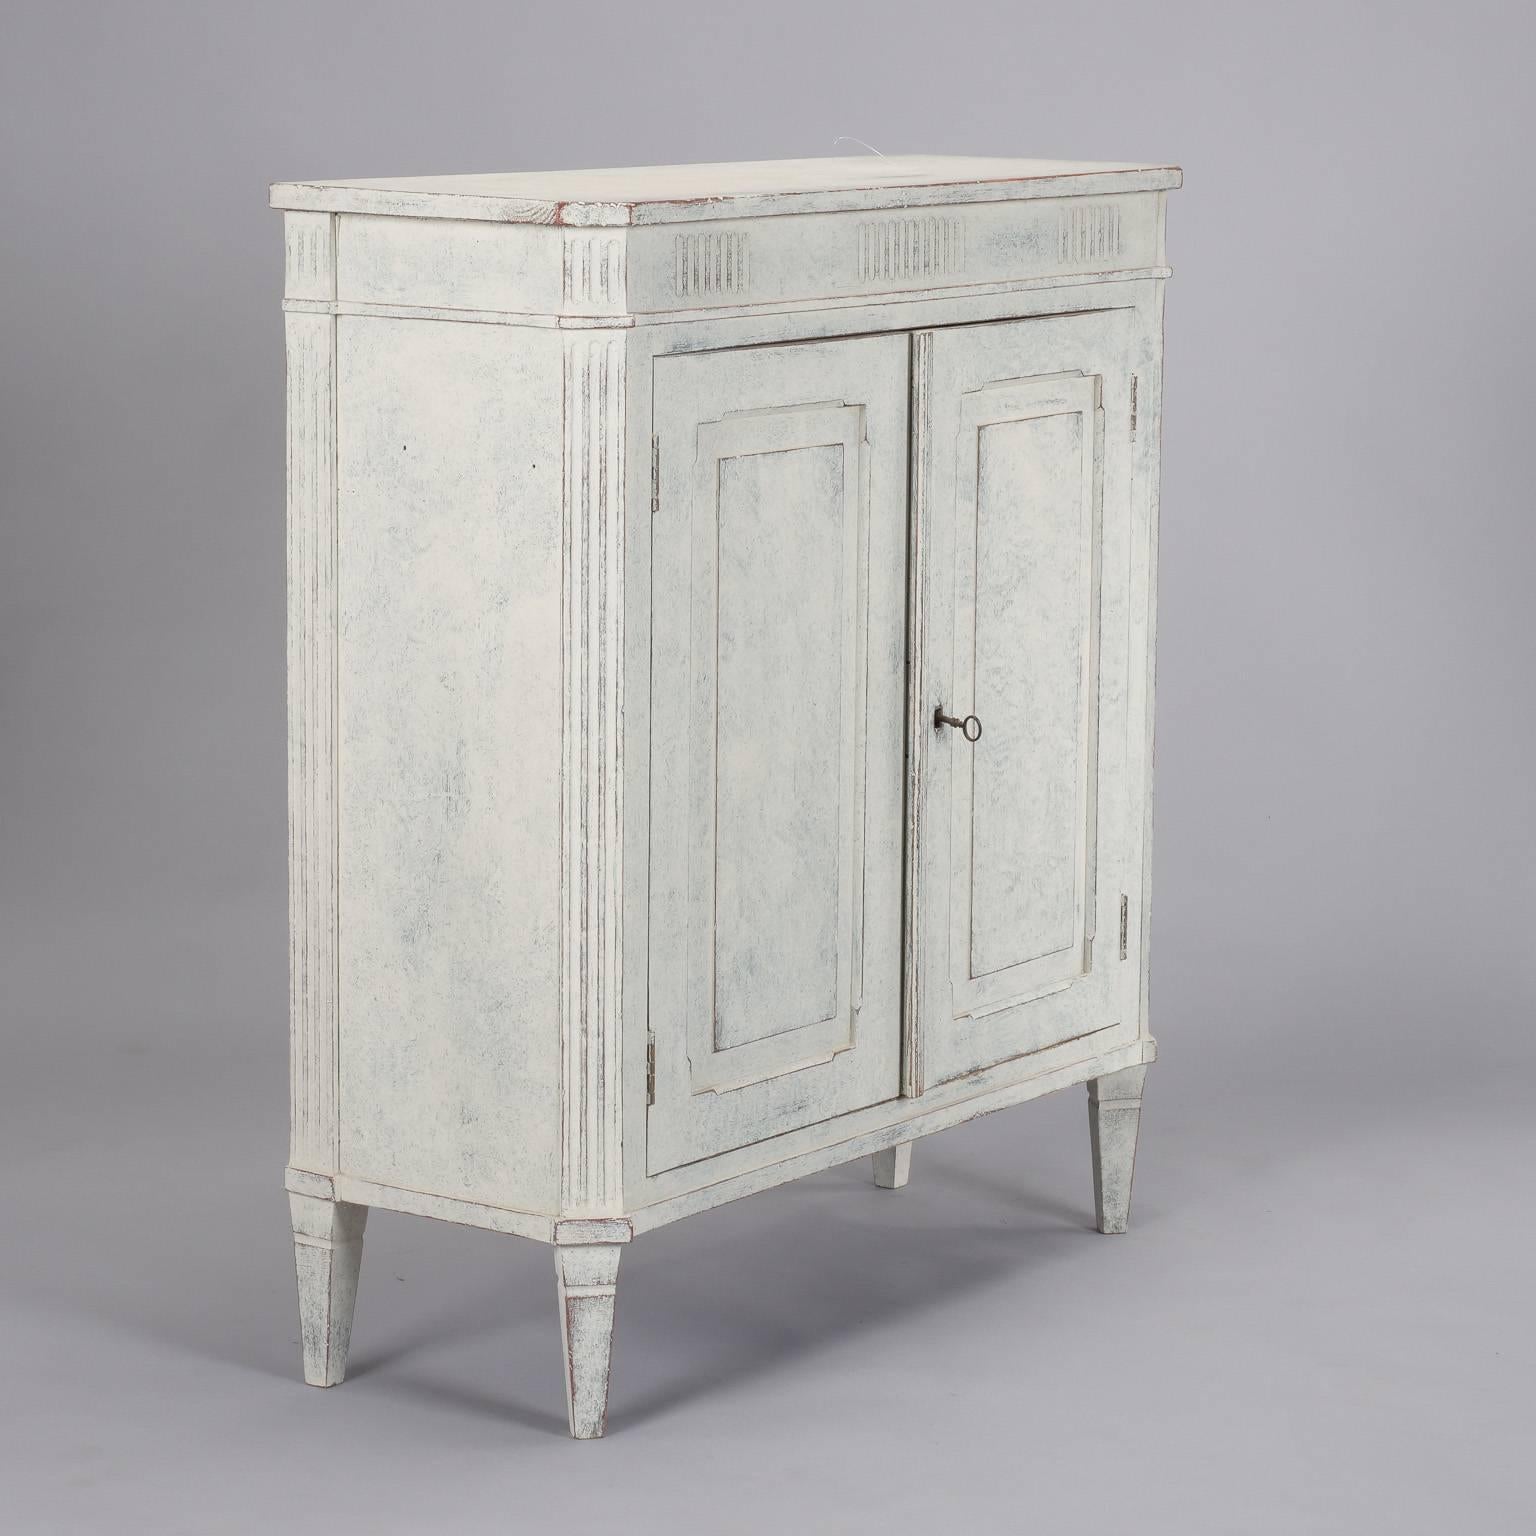 20th Century French White with Blue-Gray Undertones Two-Door Cabinet